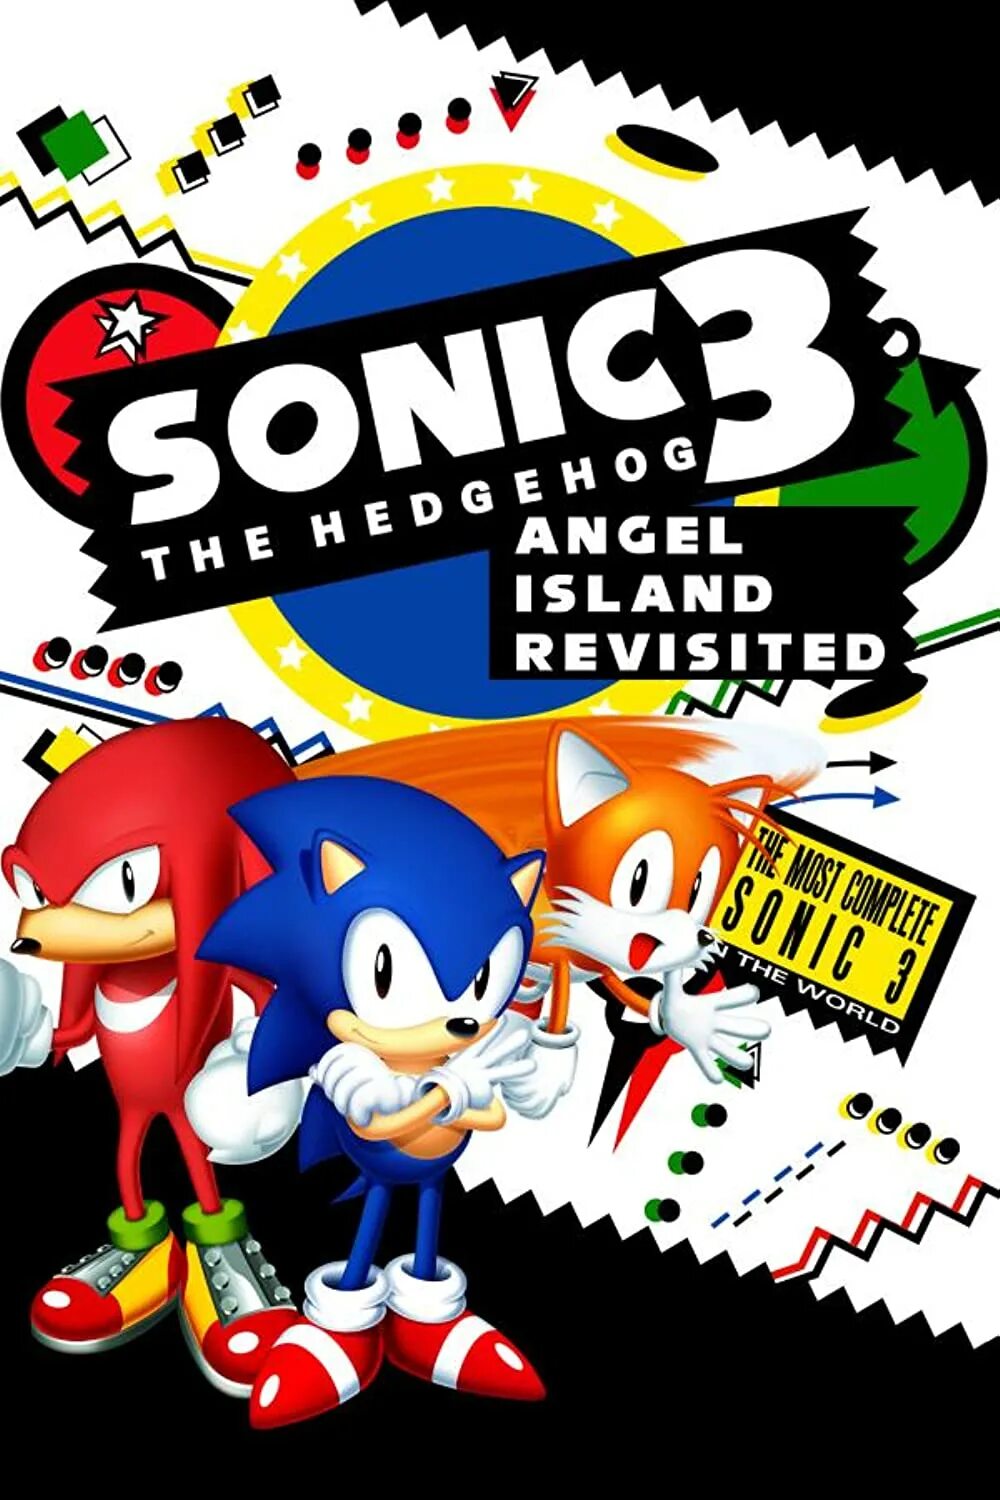 Play sonic 3. Игра Sonic the Hedgehog 3. Sonic 3 Air. Sonic 3 Air logo. Angel Island! (Sonic 3 and Knuckles).